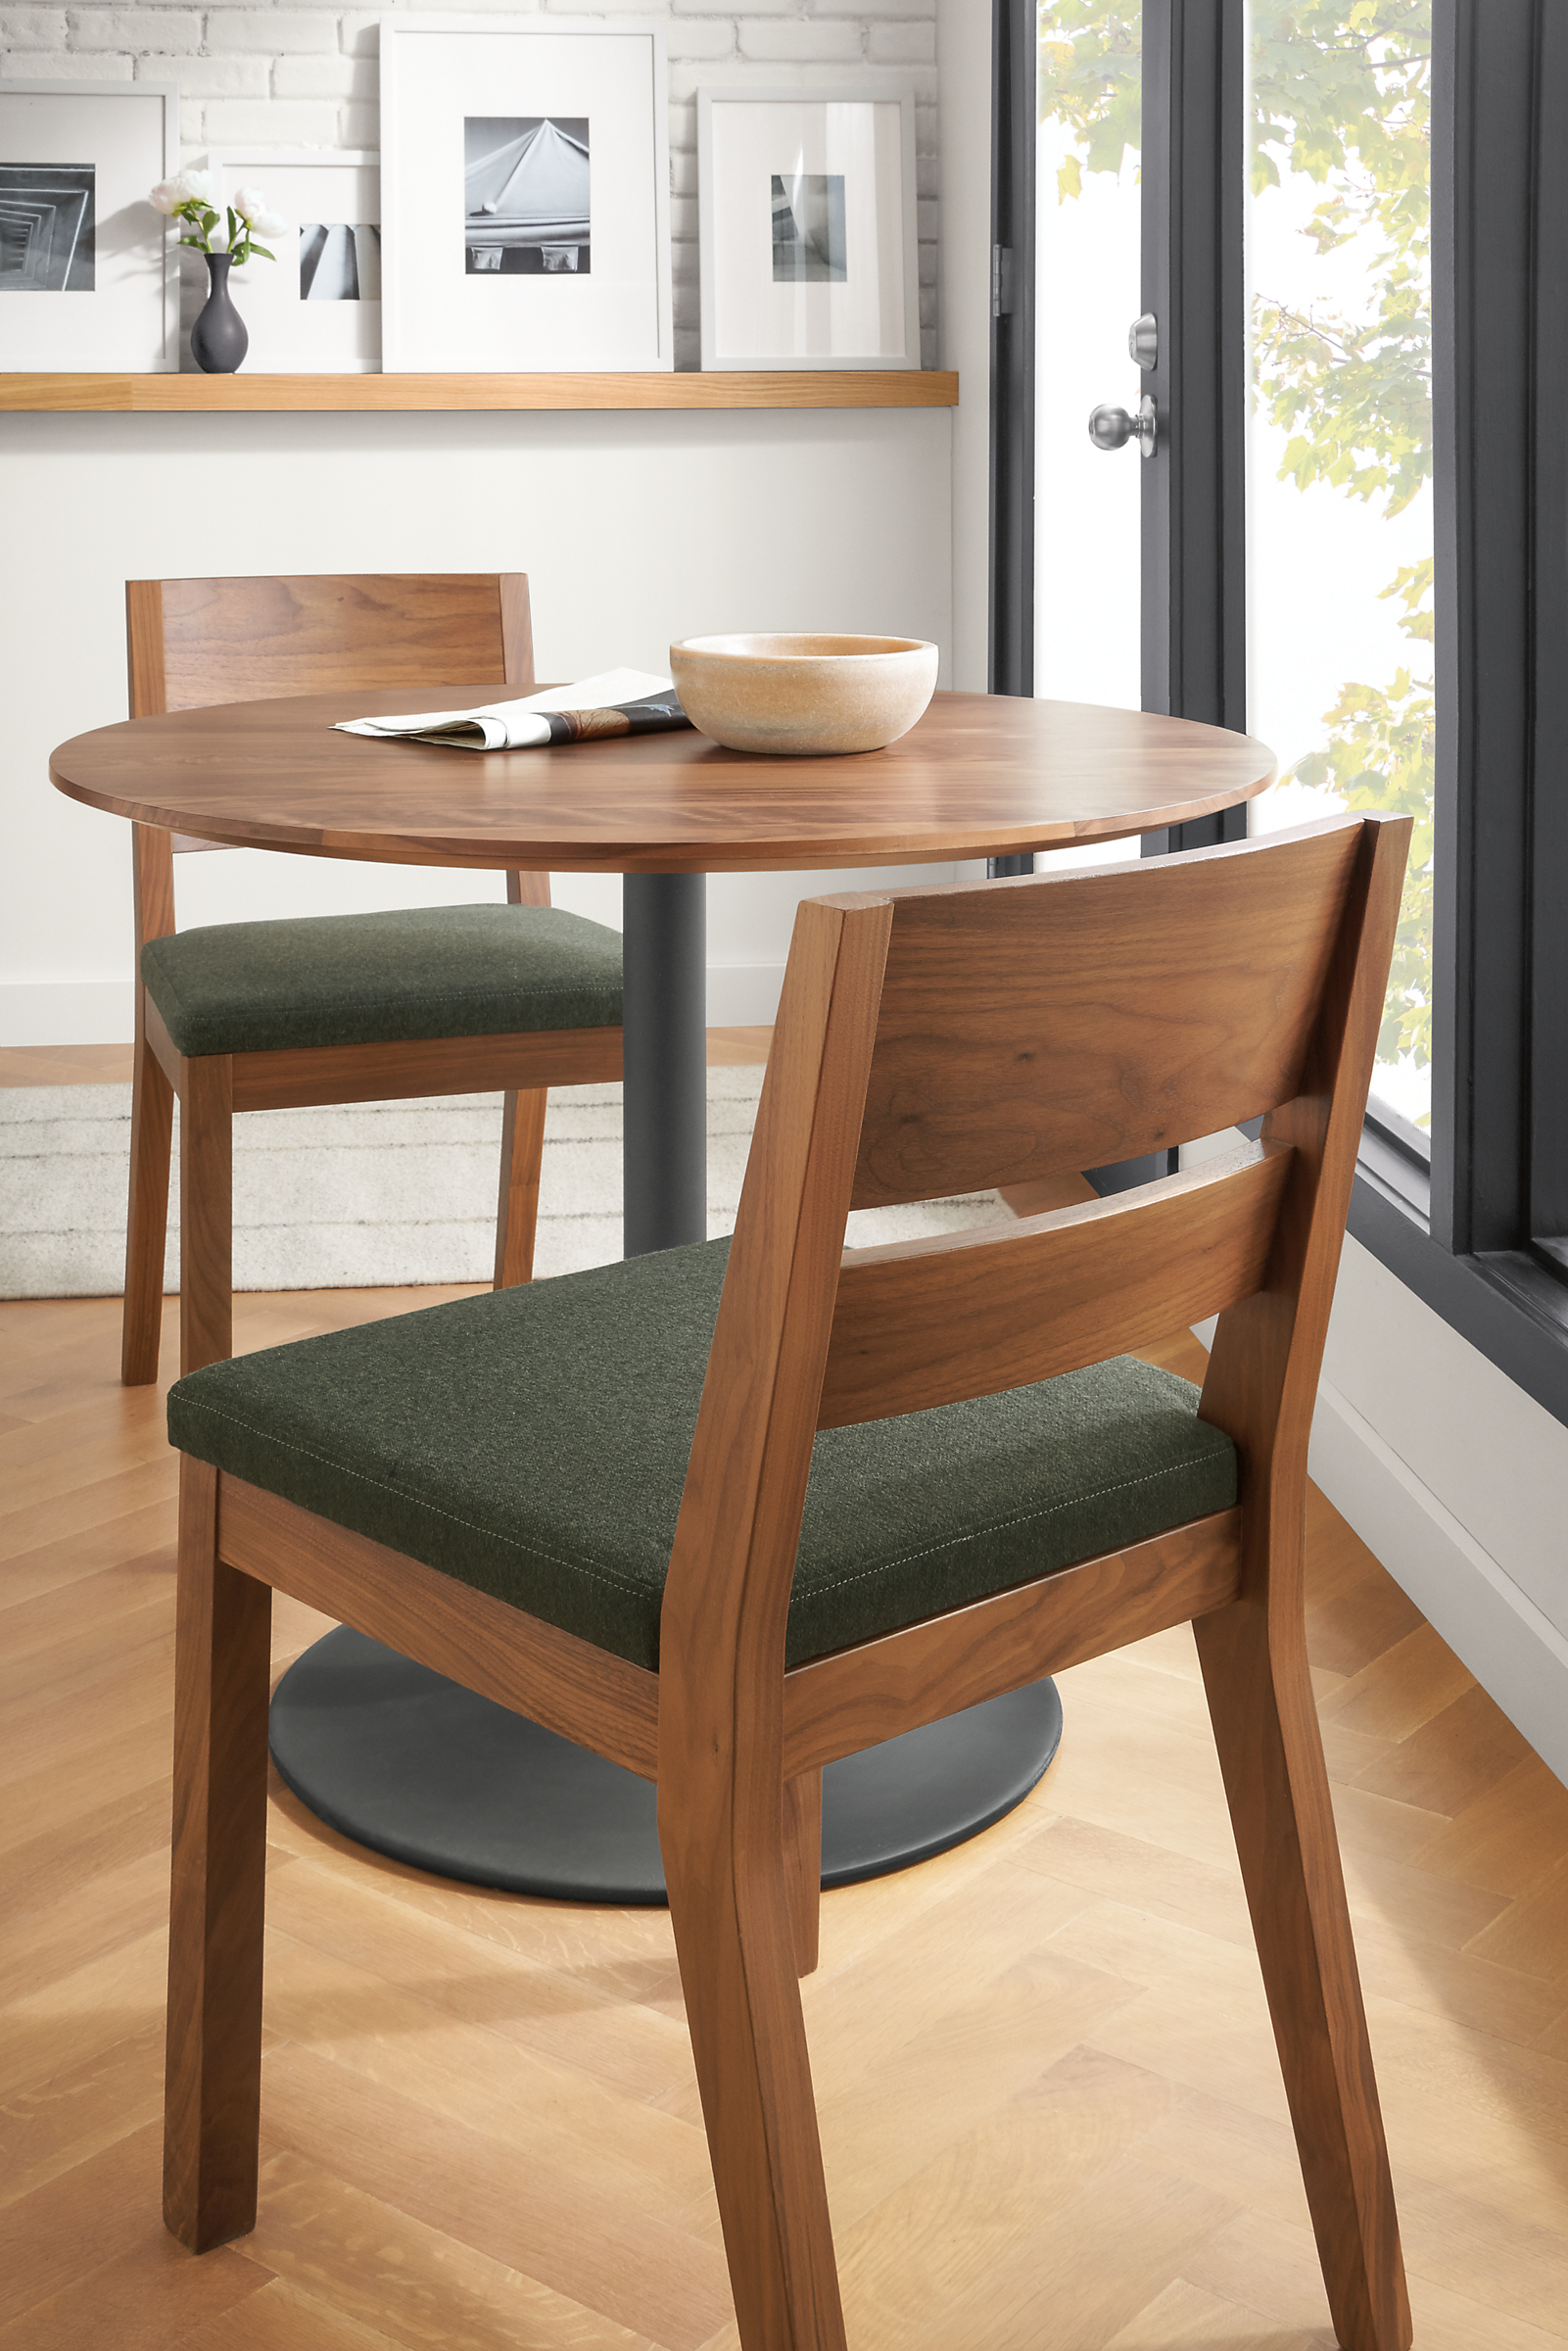 Detail of 2 Afton side chairs in walnut with Flint fabric seat at round kitchen table.